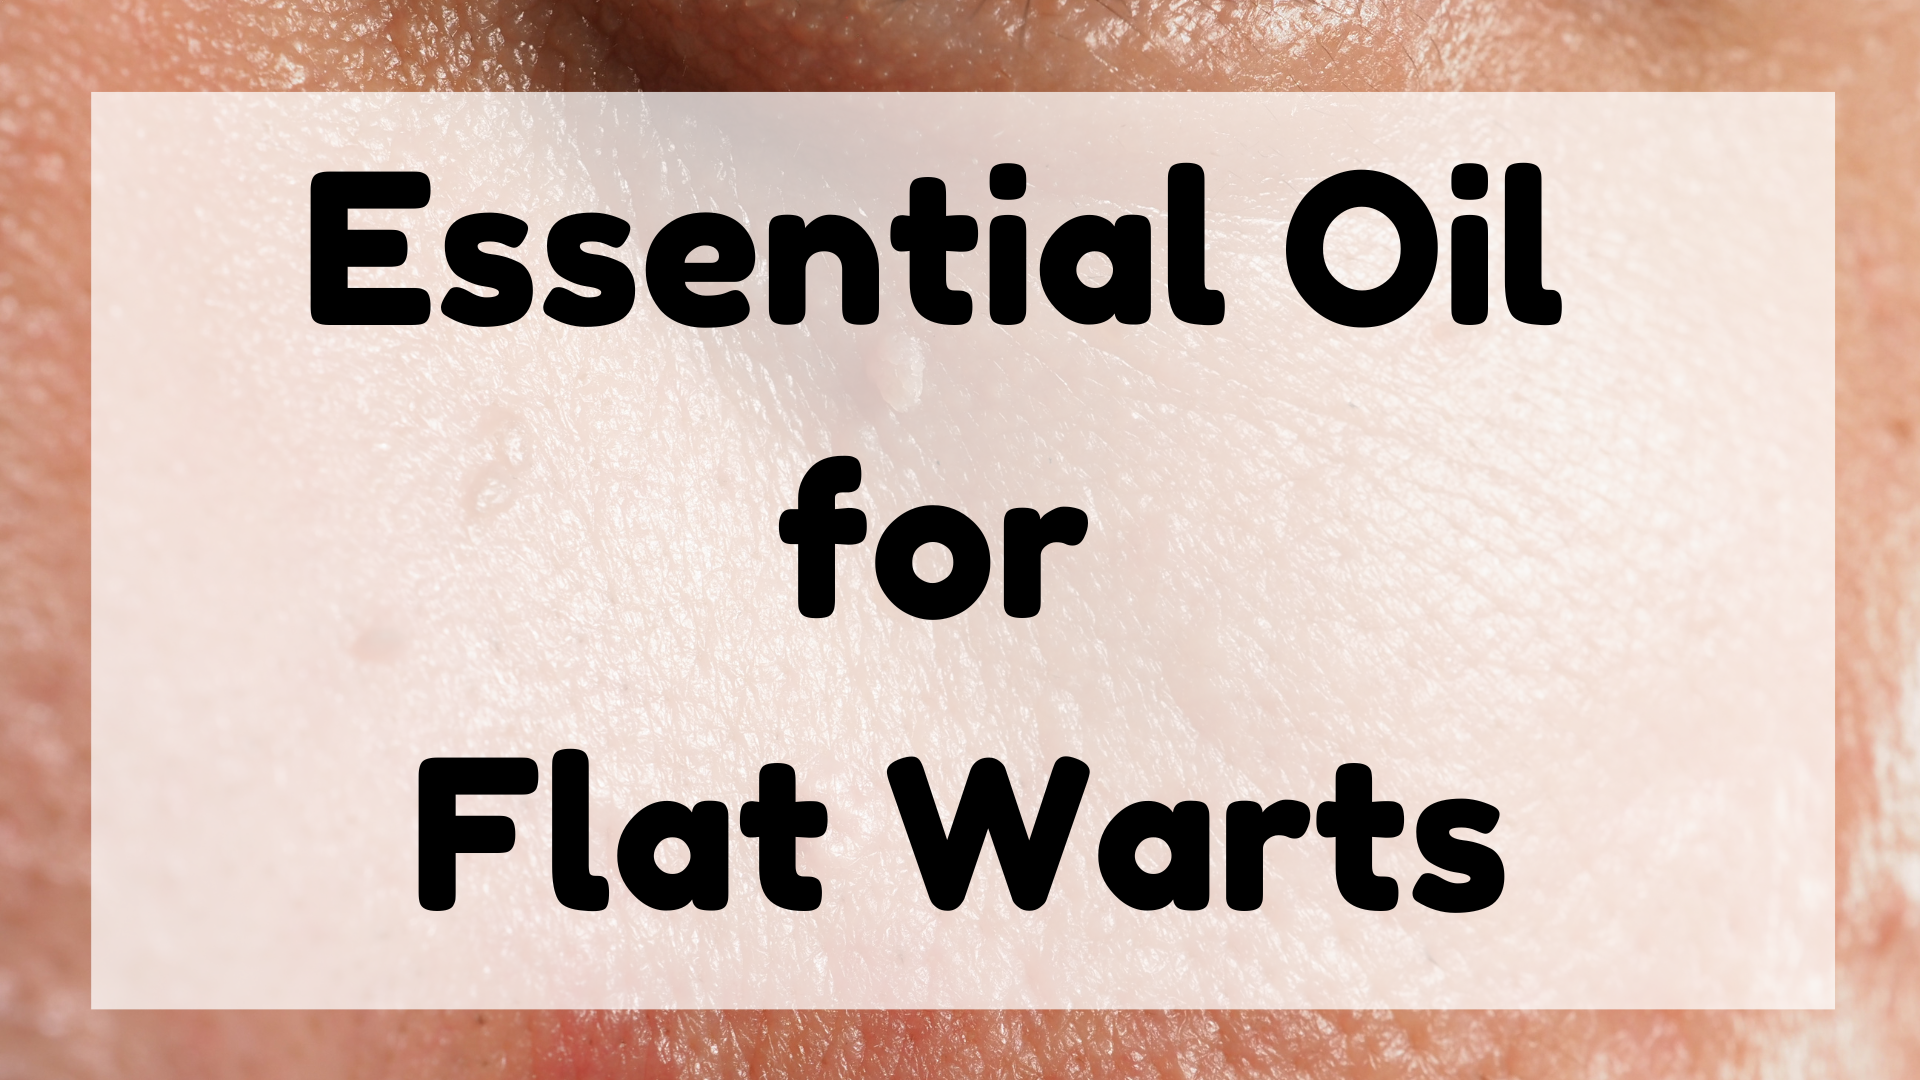 Essential Oil for Flat Warts featured image